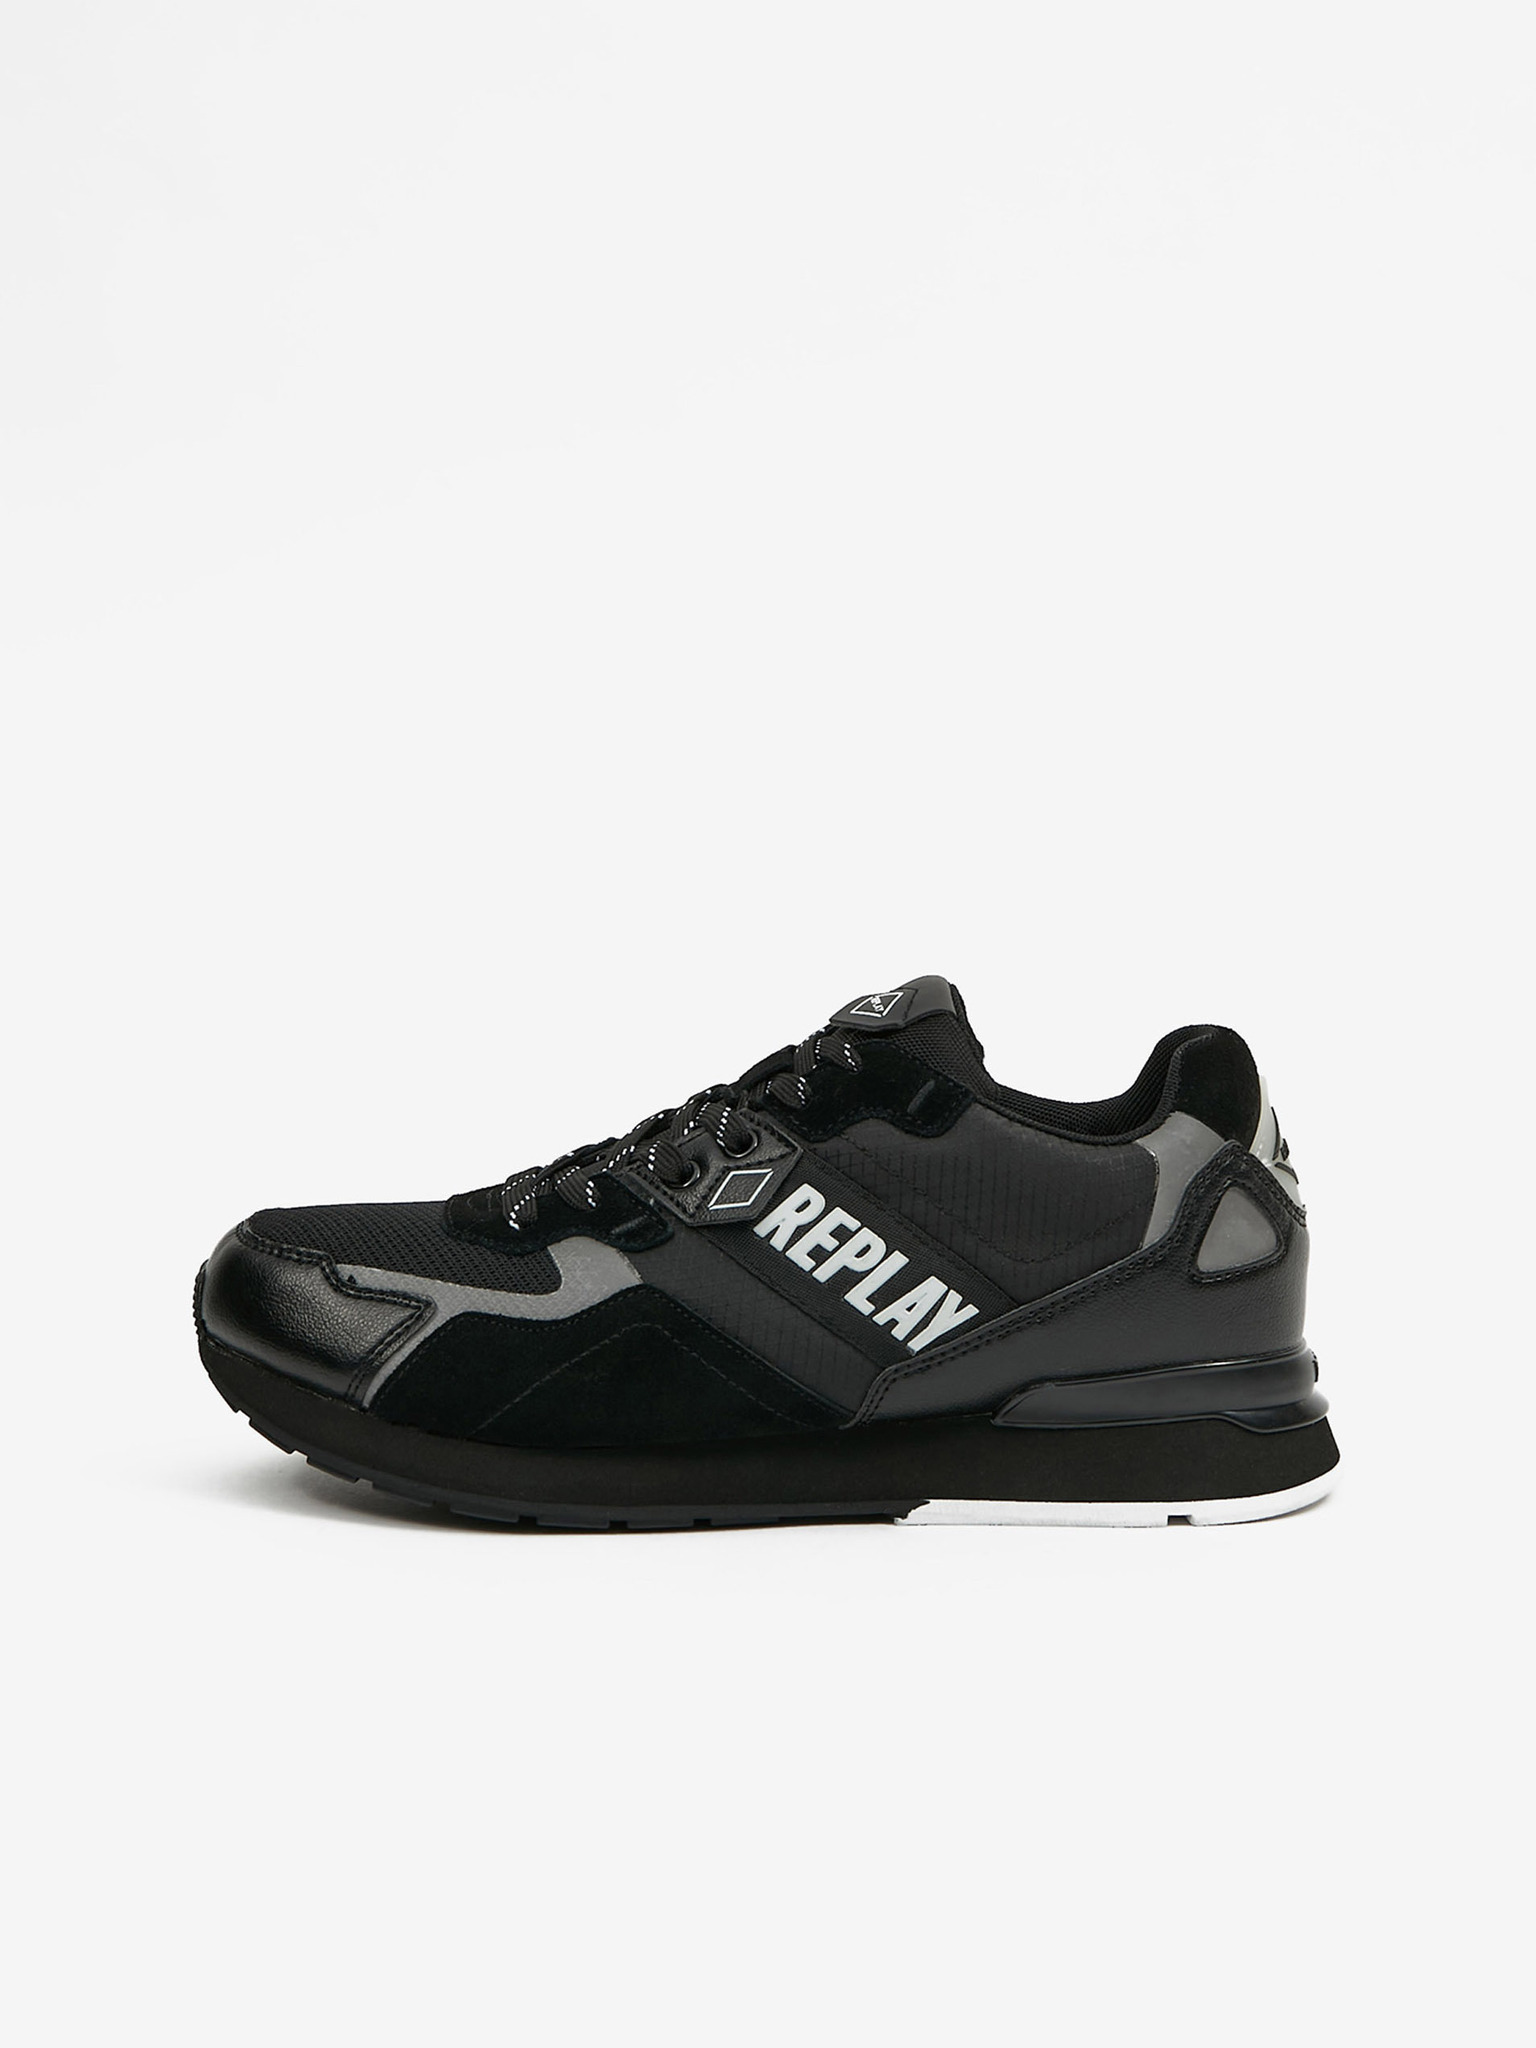 REPLAY Shoes for Men